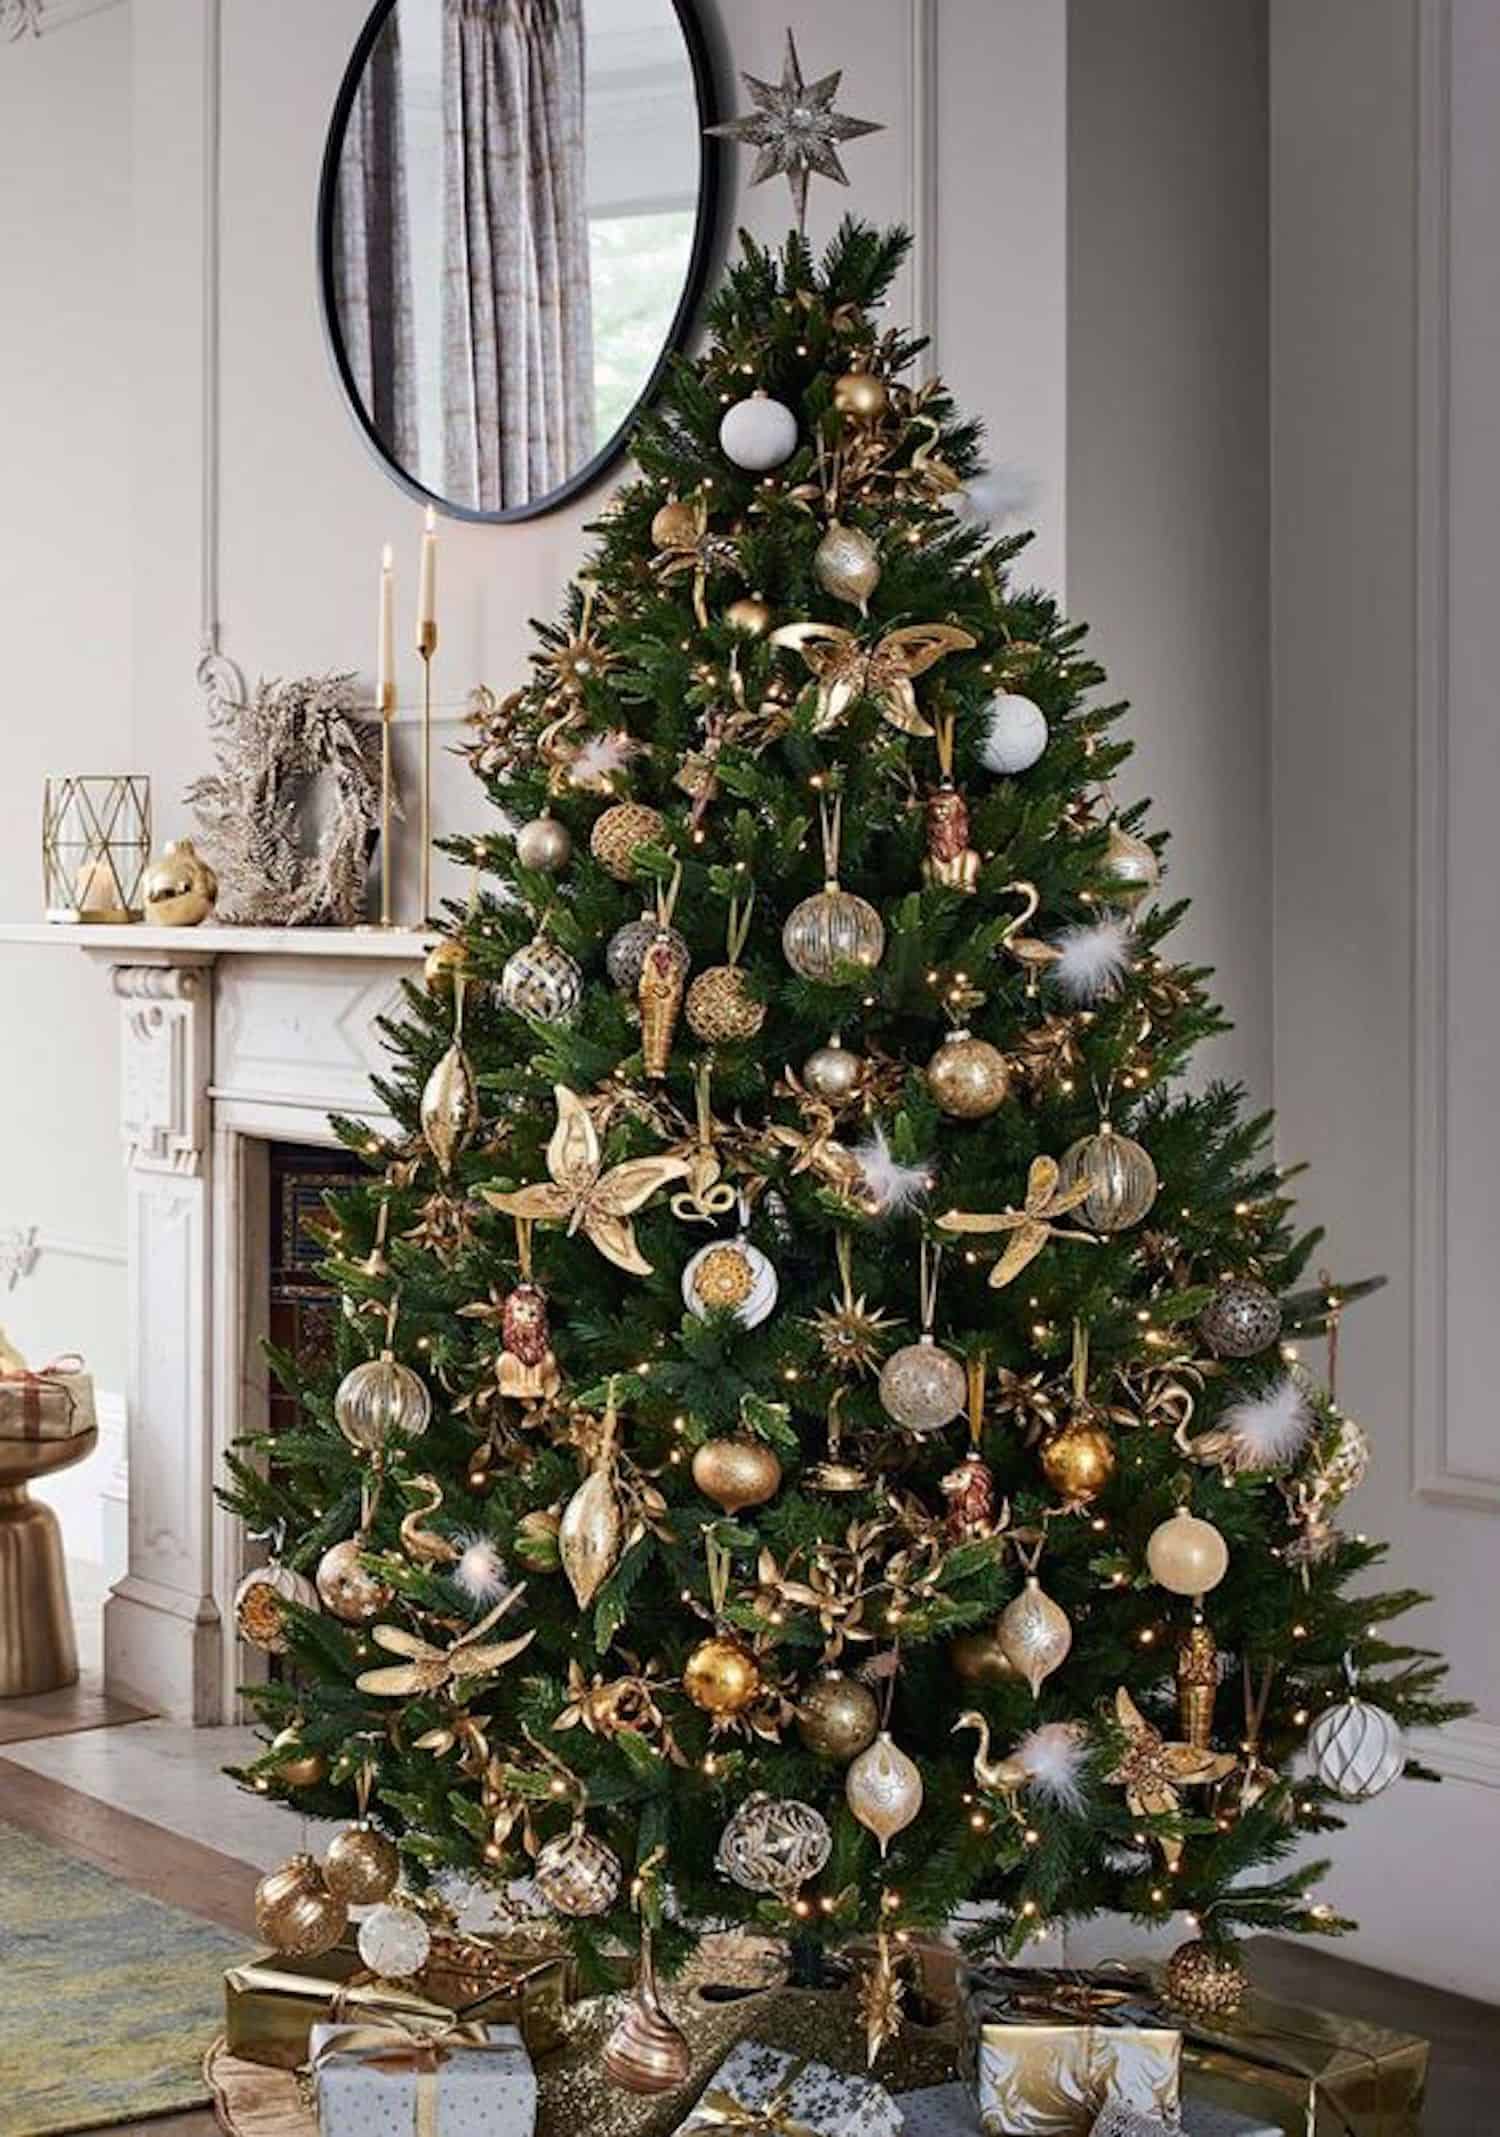 Christmas decoration idea with small balls and lights as decor items for your tree and home